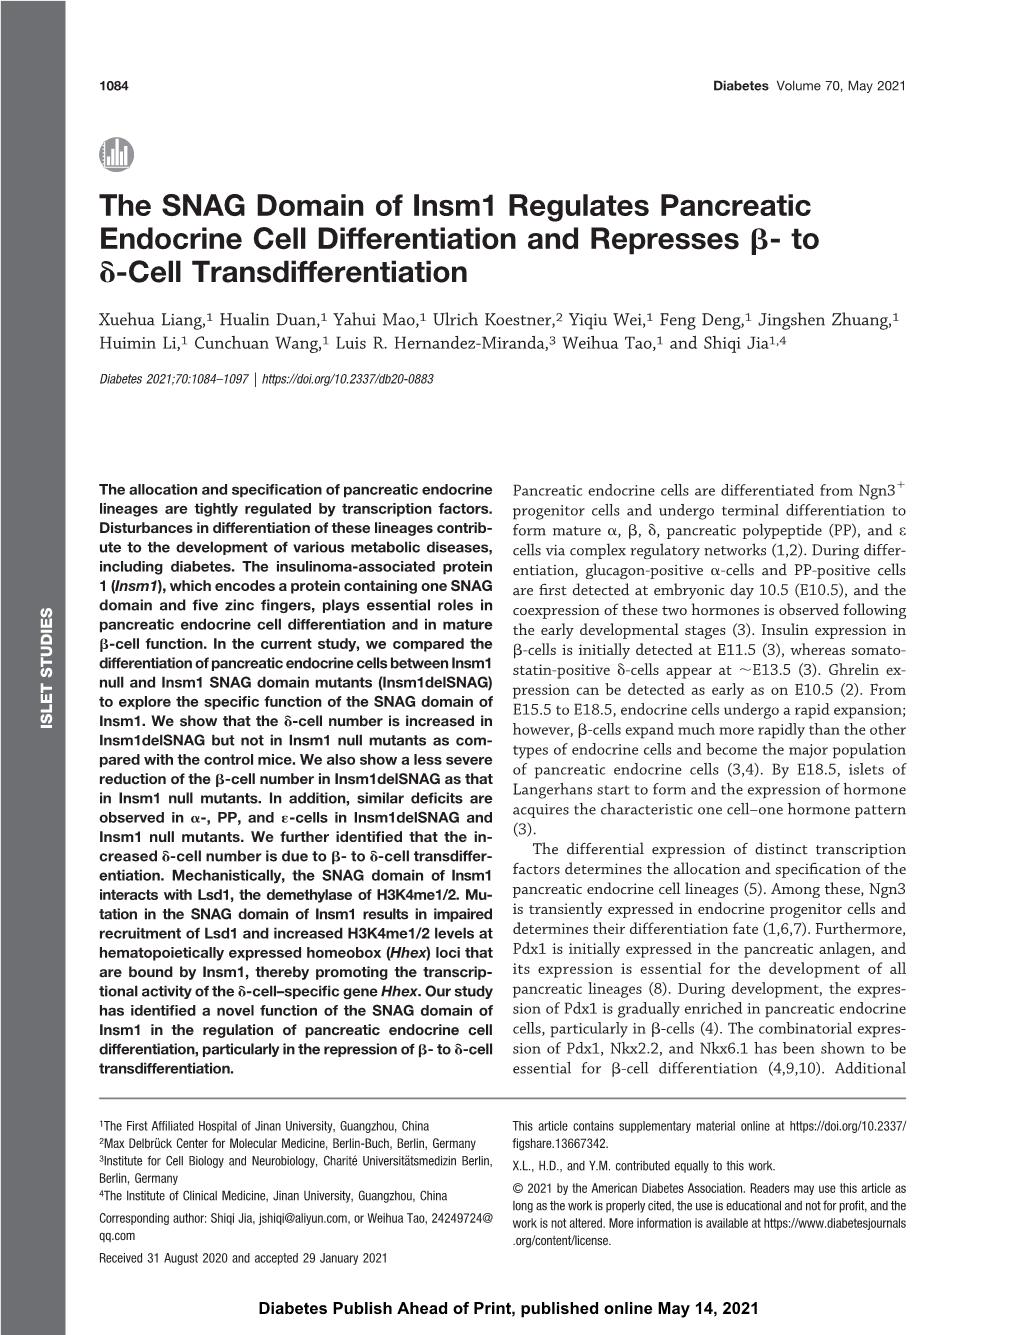 The SNAG Domain of Insm1 Regulates Pancreatic Endocrine Cell Differentiation and Represses B-To D-Cell Transdifferentiation